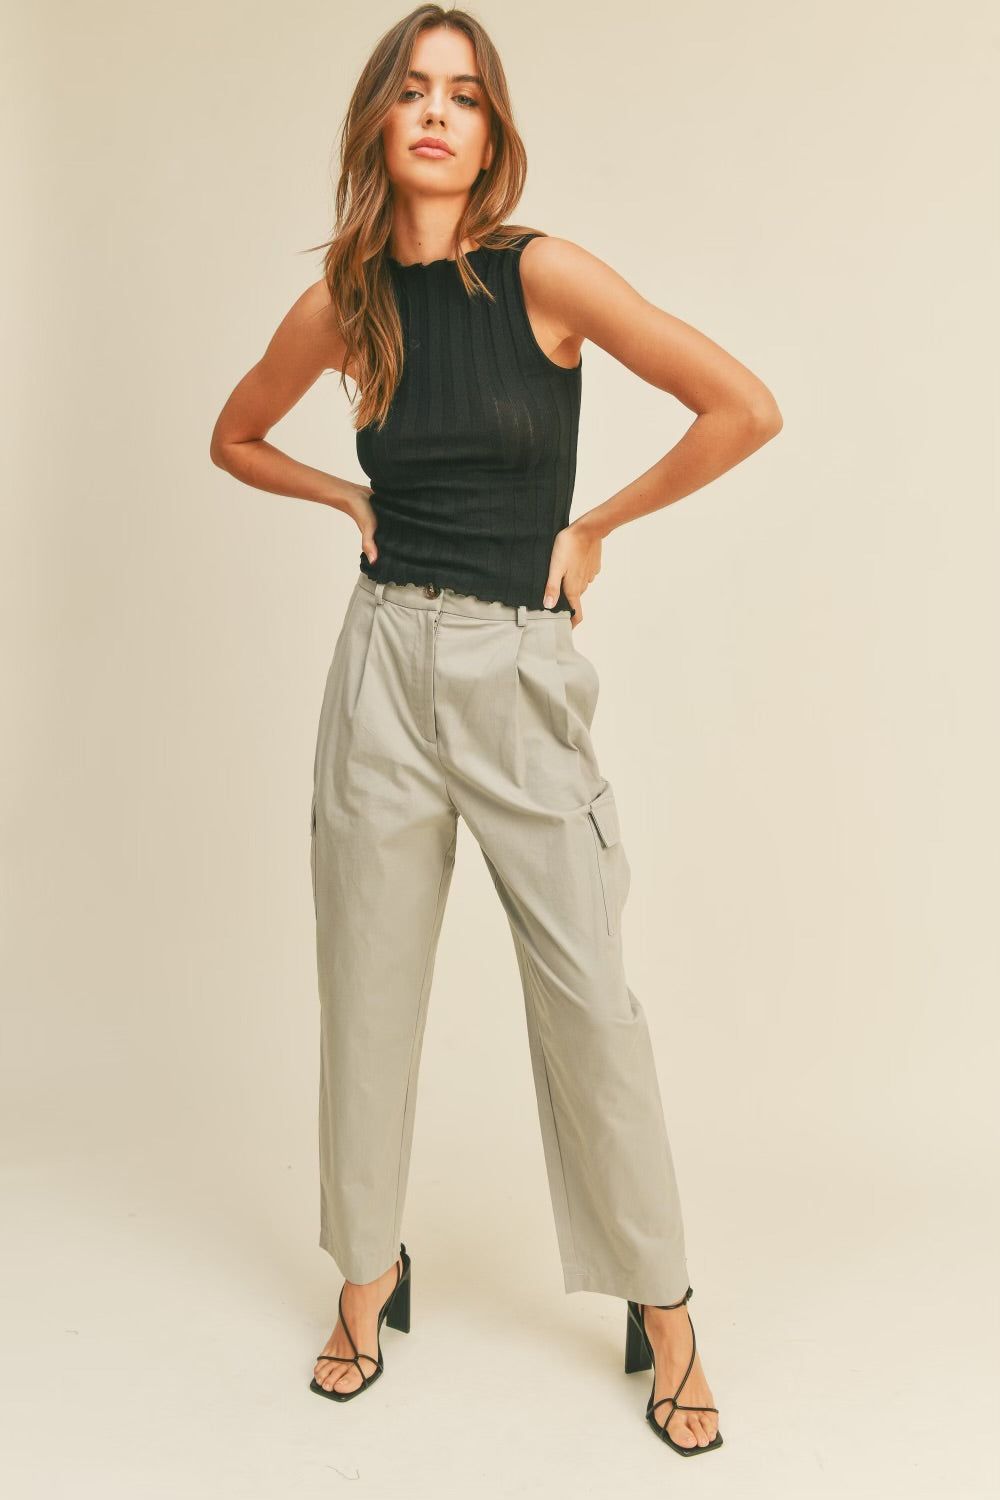 A model wearing a beige high rise cargo pant against a tan wall. 